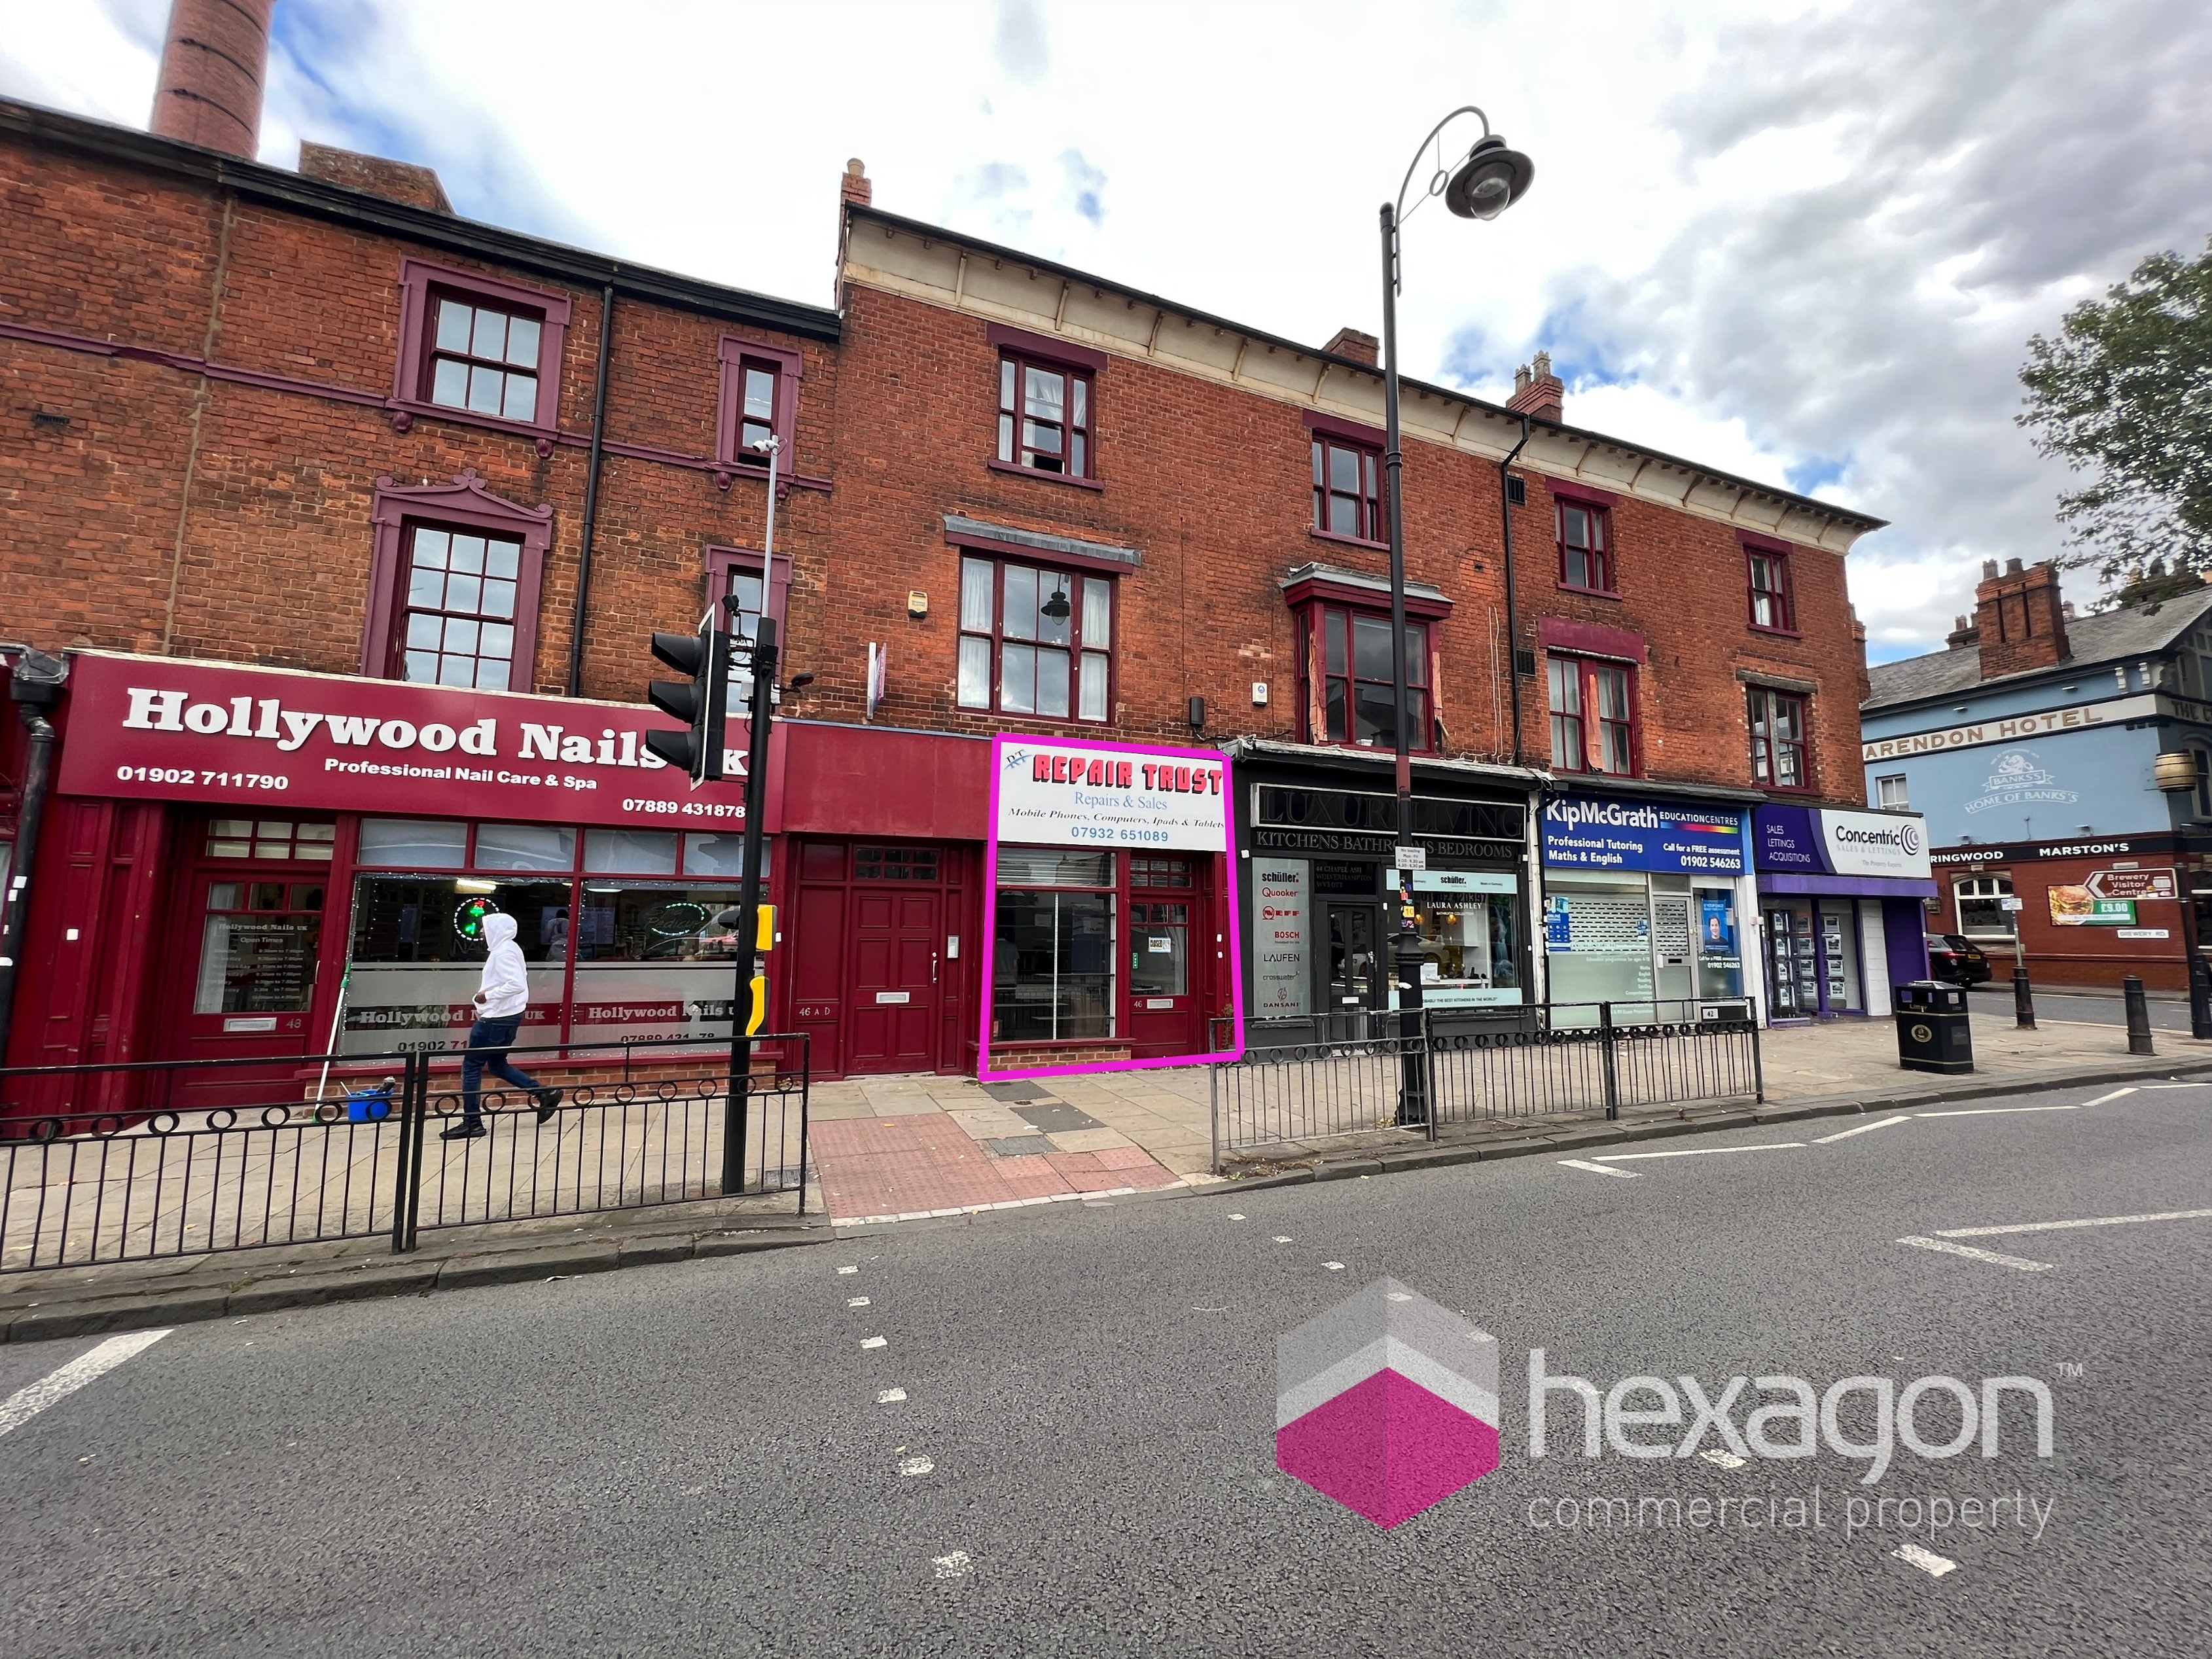 0 bed Retail Property (High Street) for rent in Wolverhampton. From Hexagon Commercial Property